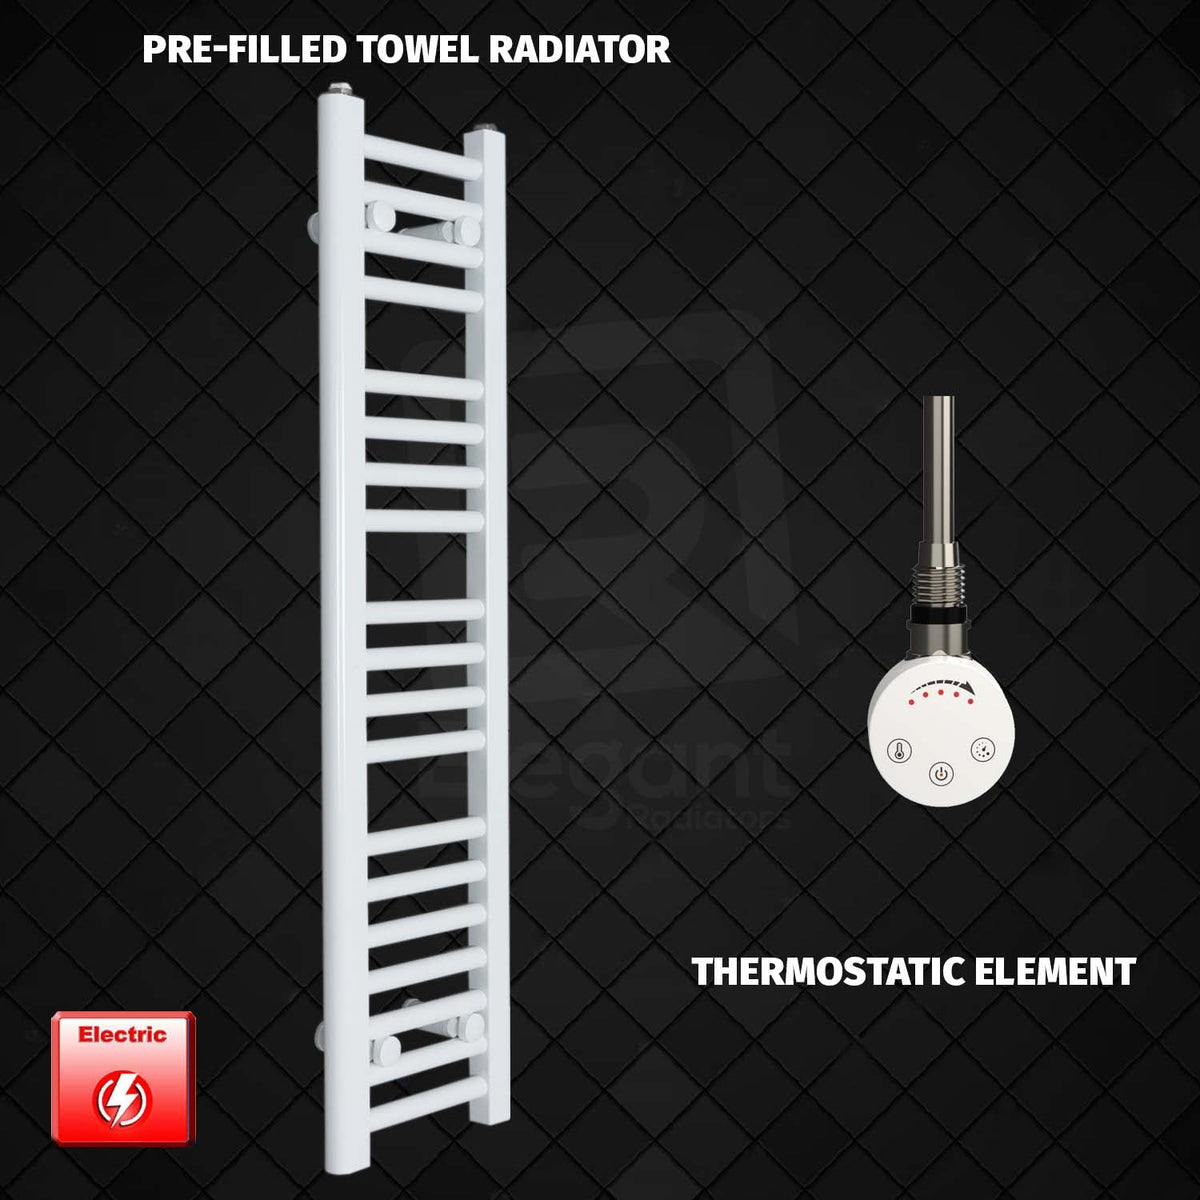 1000 x 250 Pre-Filled Electric Heated Towel Radiator White HTR Thermostatic Element